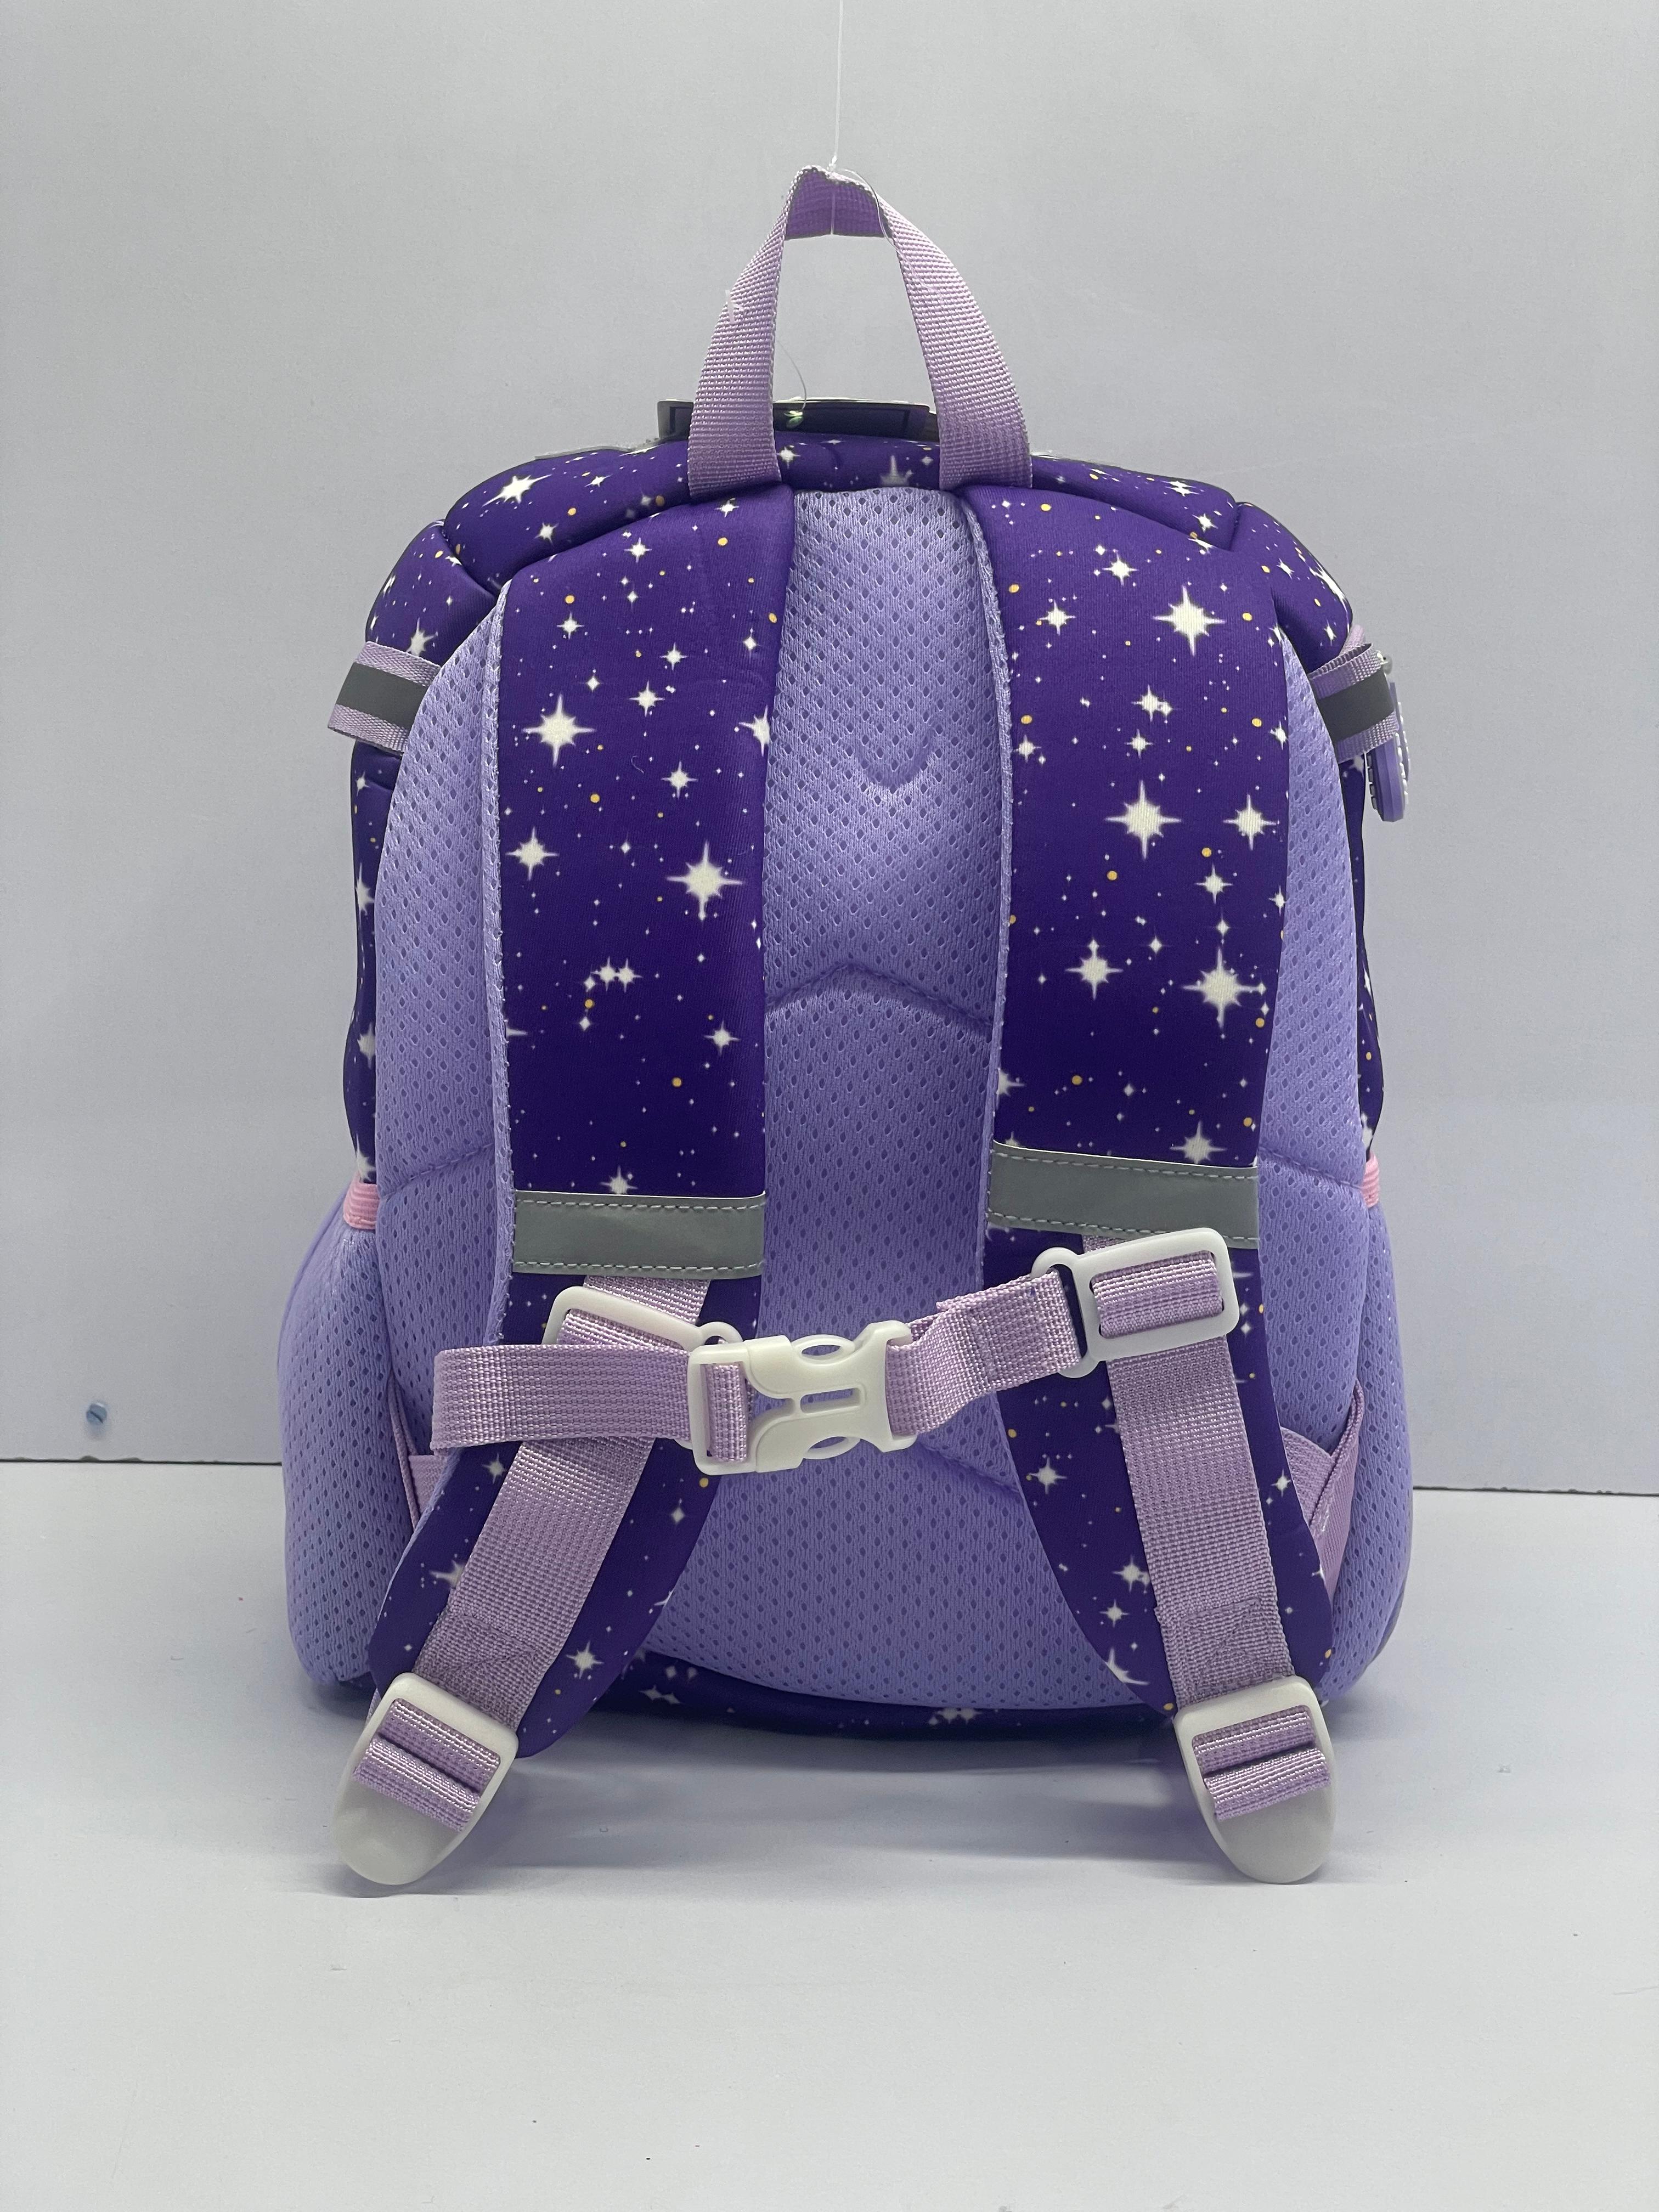 ZORSE space school backpacks for your kiddos!